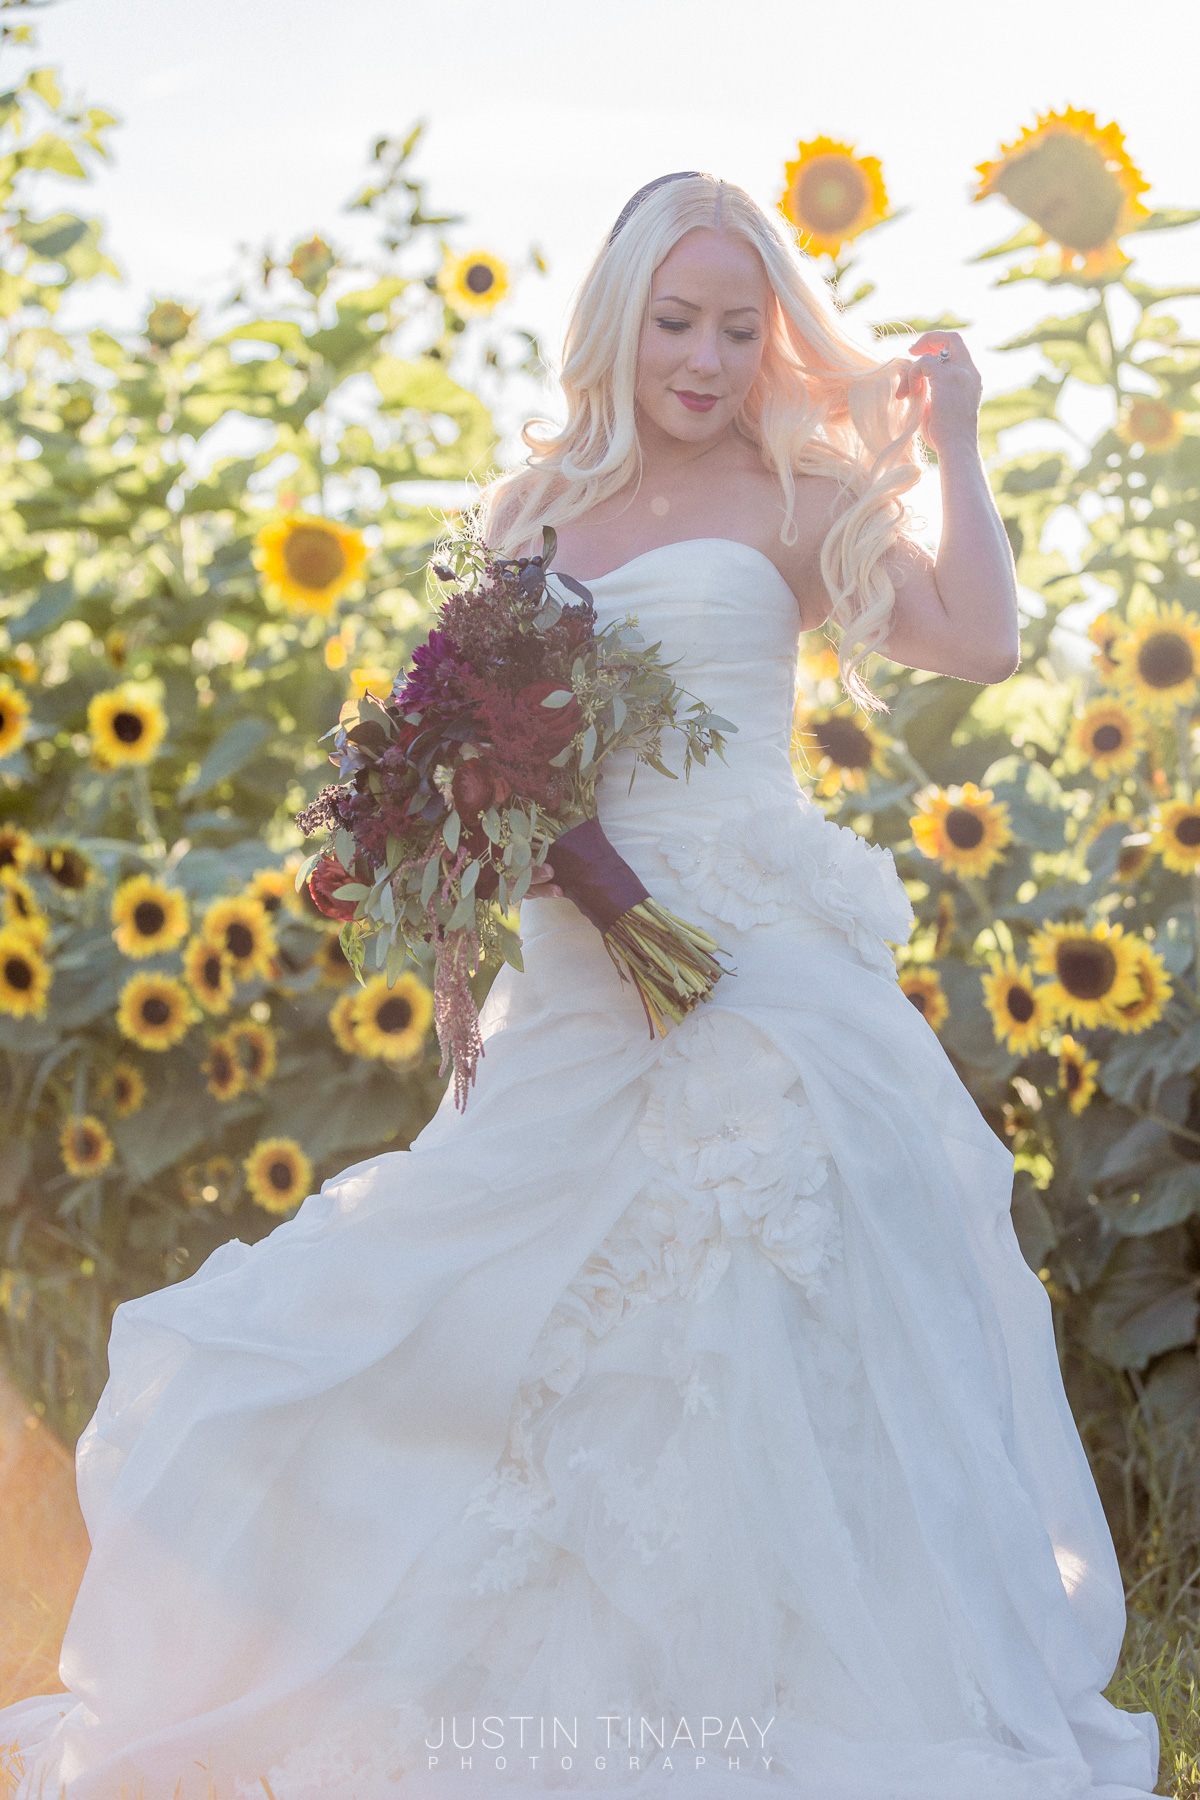 We love this boho chic ballgown and it's perfect for a garden wedding. Check out the blog to get ideas for your outdoor wedding day and download the venue guide for free!